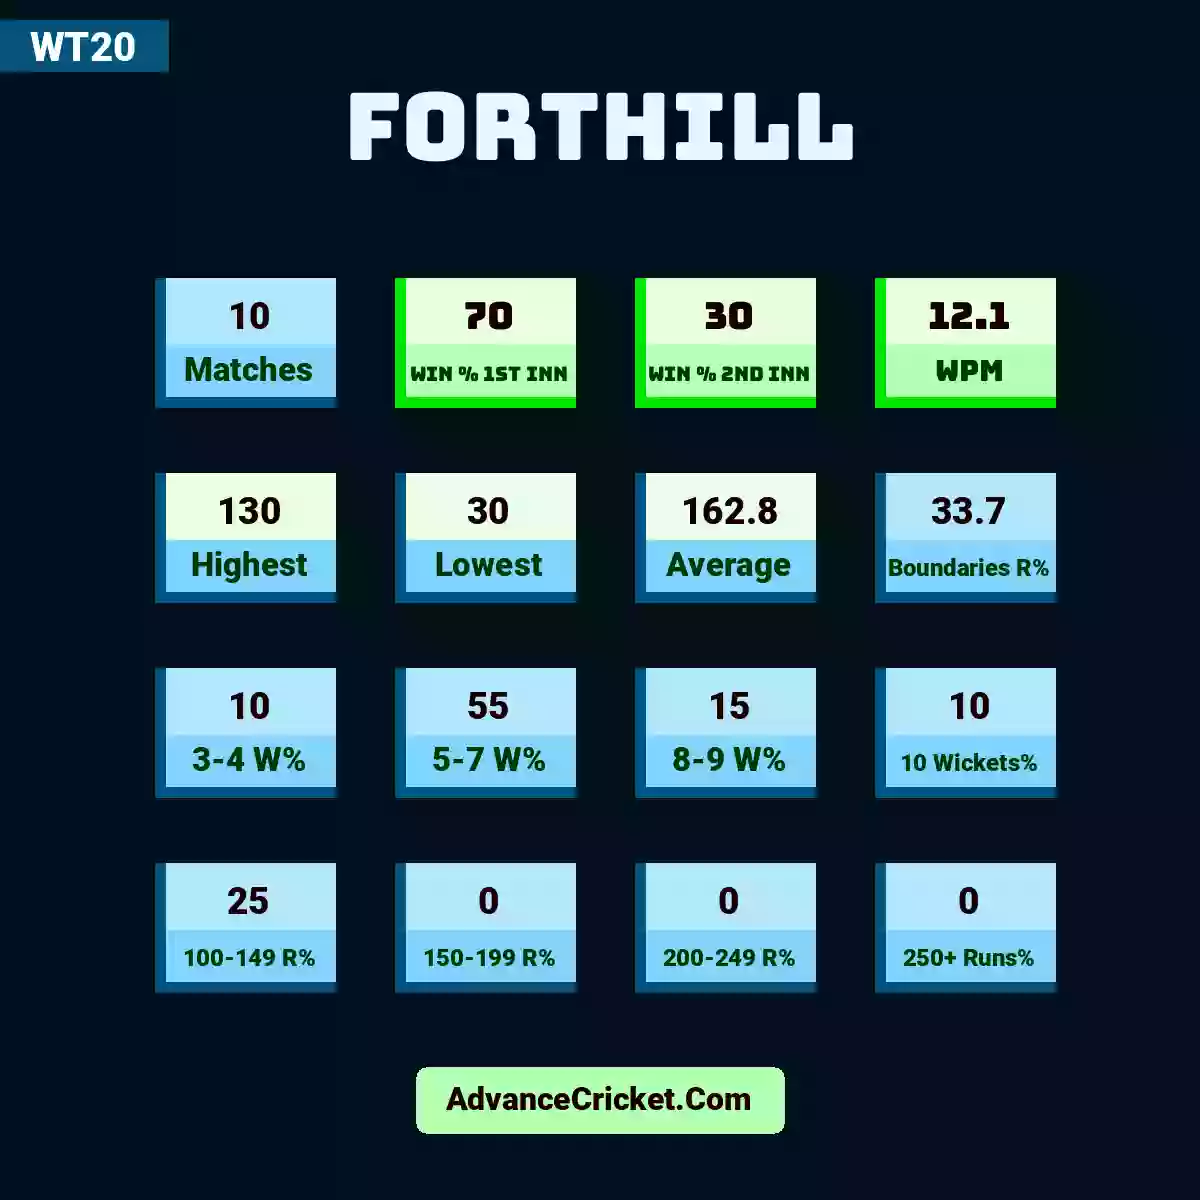 Image showing Forthill with Matches: 10, Win % 1st Inn: 70, Win % 2nd Inn: 30, WPM: 12.1, Highest: 130, Lowest: 30, Average: 162.8, Boundaries R%: 33.7, 3-4 W%: 10, 5-7 W%: 55, 8-9 W%: 15, 10 Wickets%: 10, 100-149 R%: 25, 150-199 R%: 0, 200-249 R%: 0, 250+ Runs%: 0.